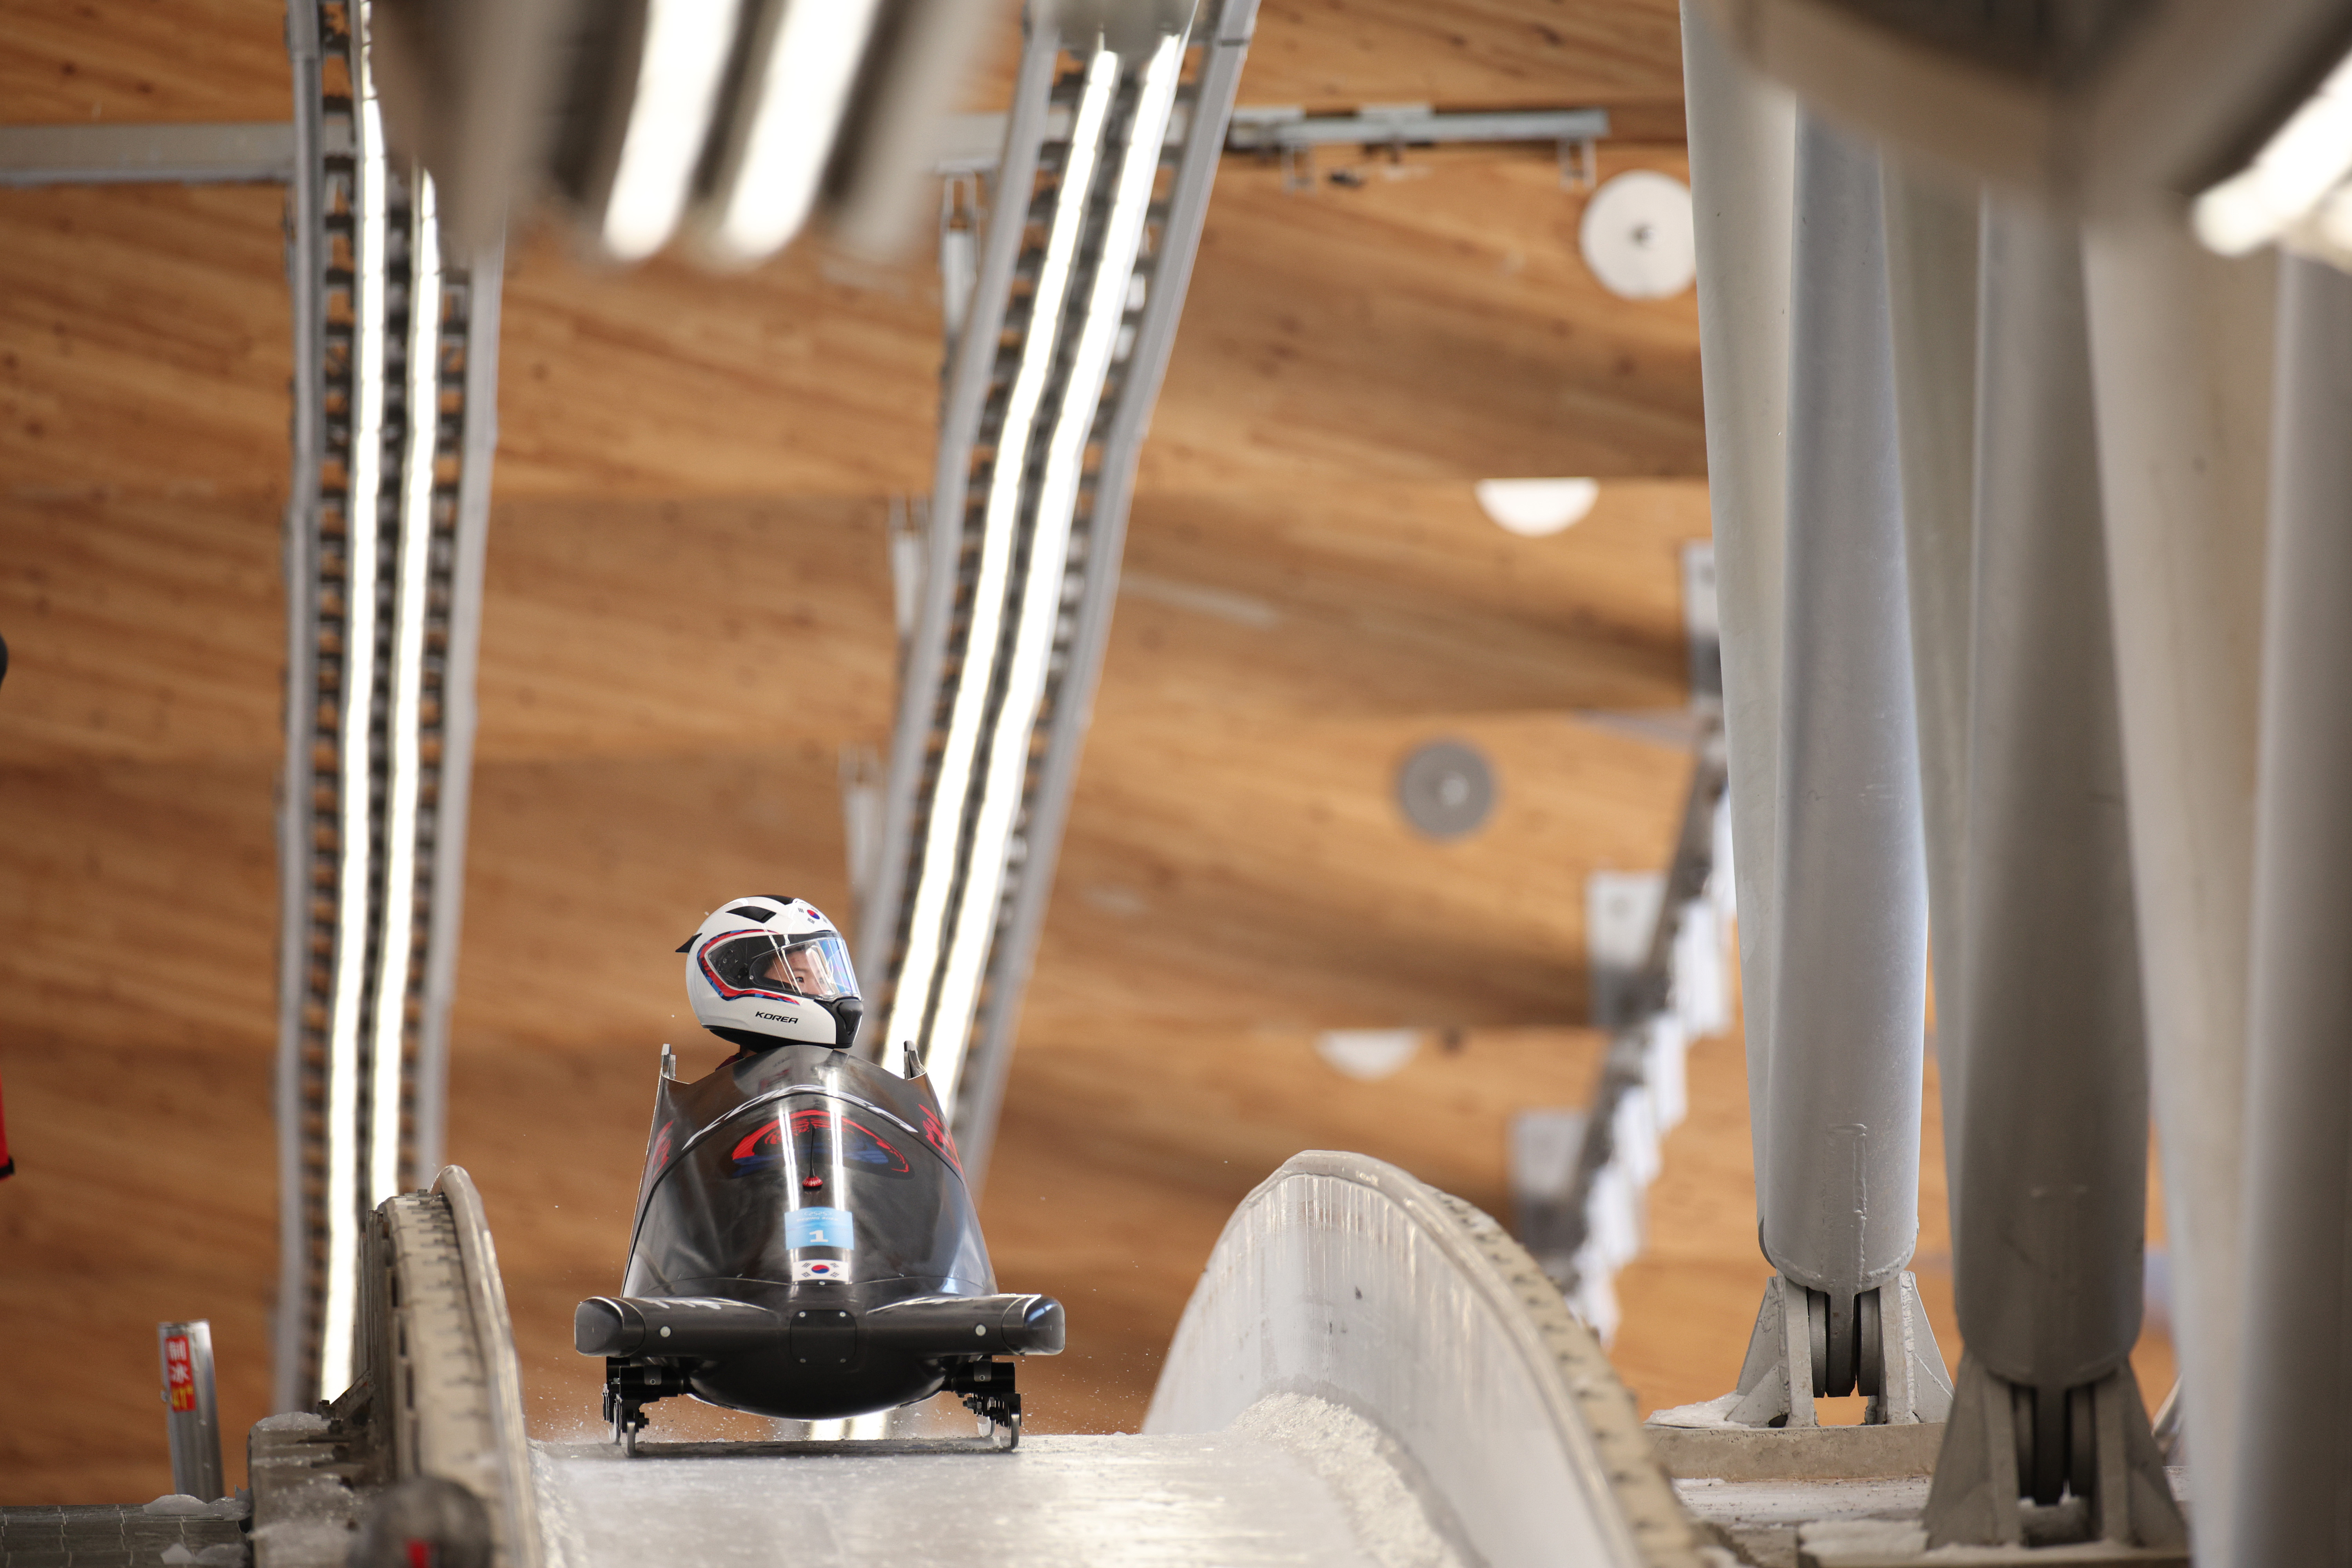 Yooran Kim of Team South Korea reacts during the Women’s Monobob Bobsleigh Heat 3 on day 10 of Beijing 2022 Winter Olympic Games at National Sliding Centre on February 14, 2022 in Yanqing, China.